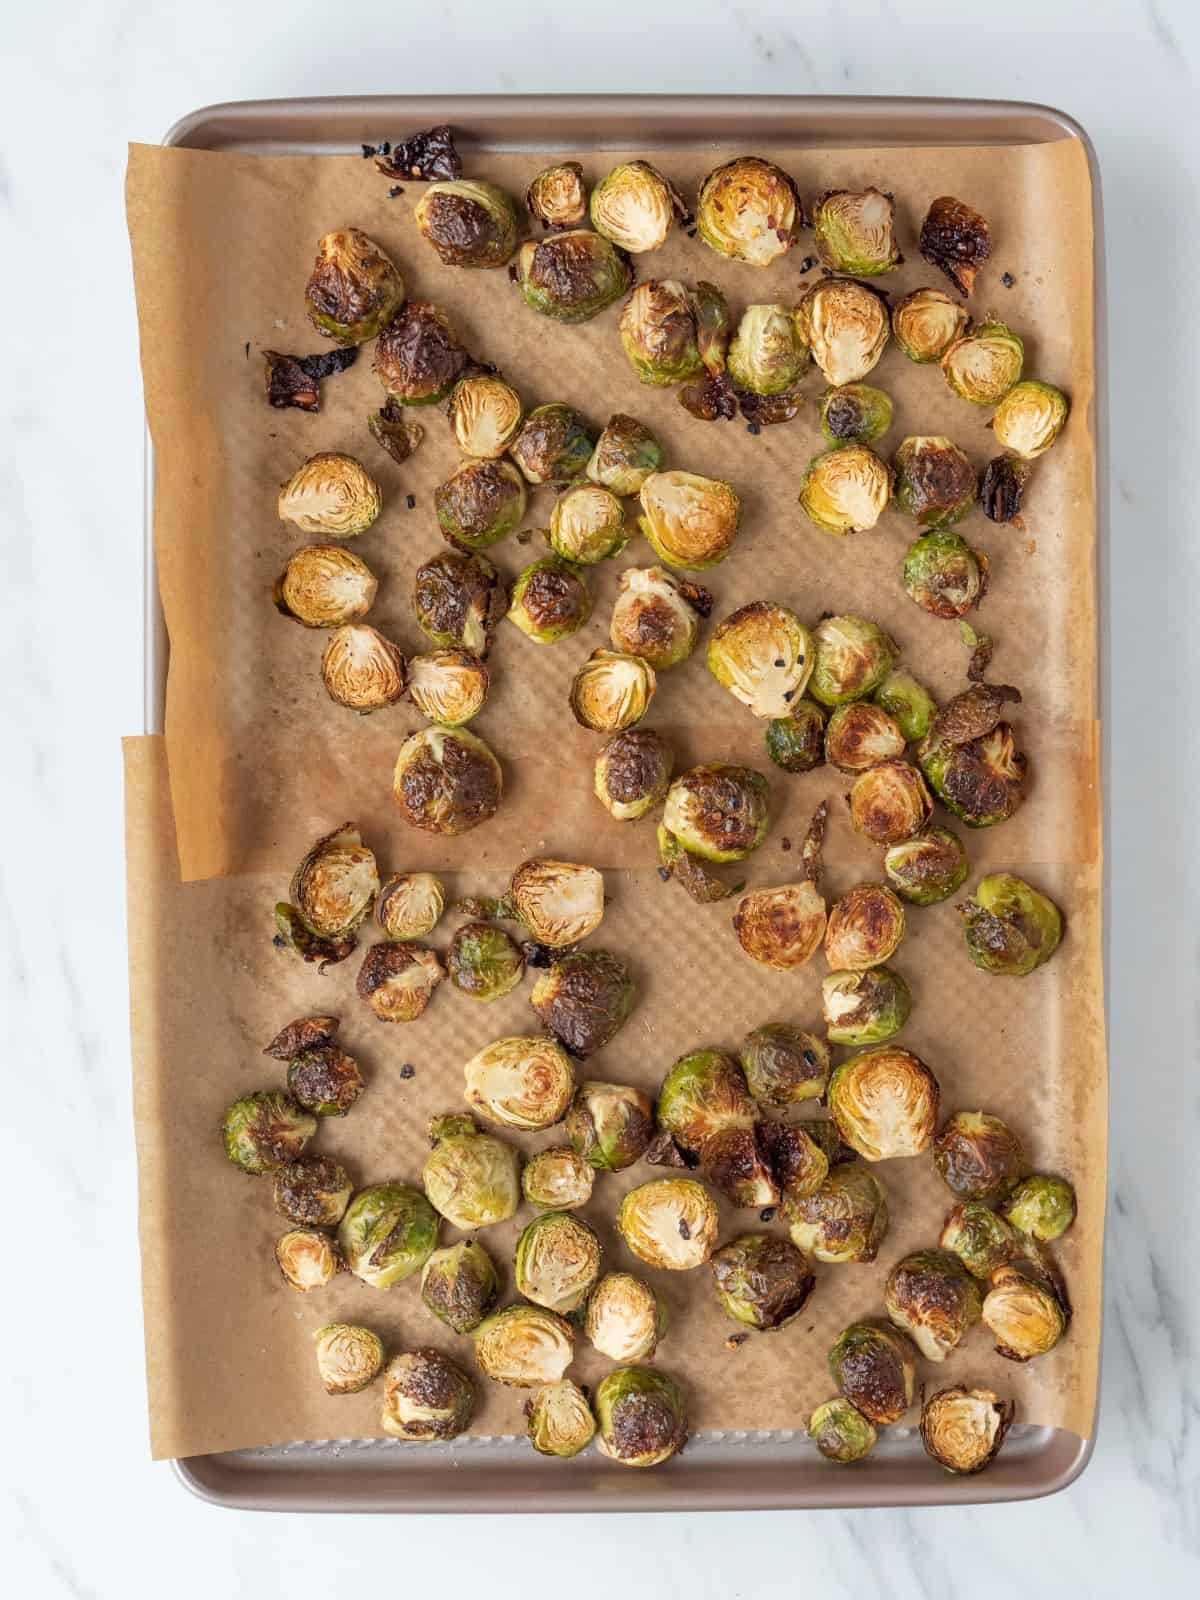 A baking sheet pan lined with parchment paper with halved roasted brussels sprouts.